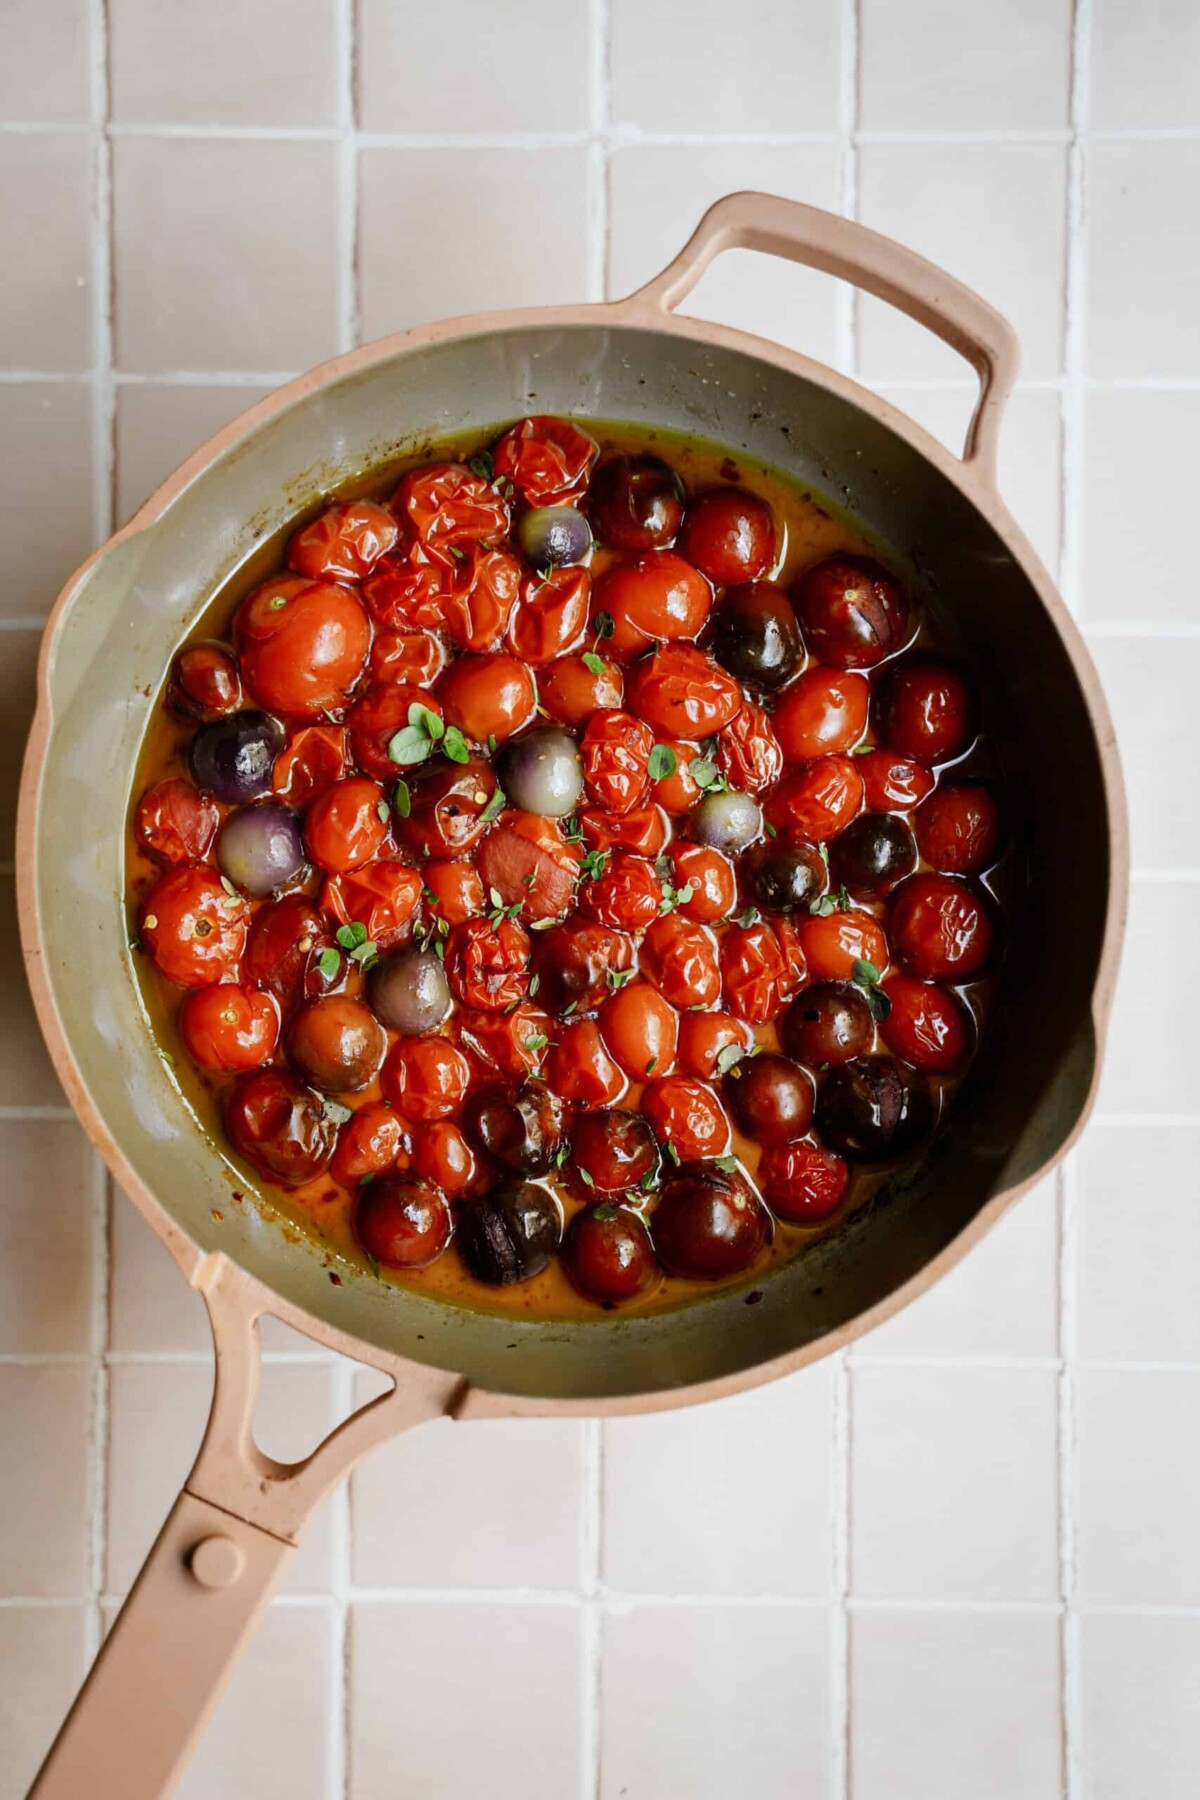 Tomatoes, salt, pepper, fresh herbs and chili pepper flake all cooking in a larget pot.